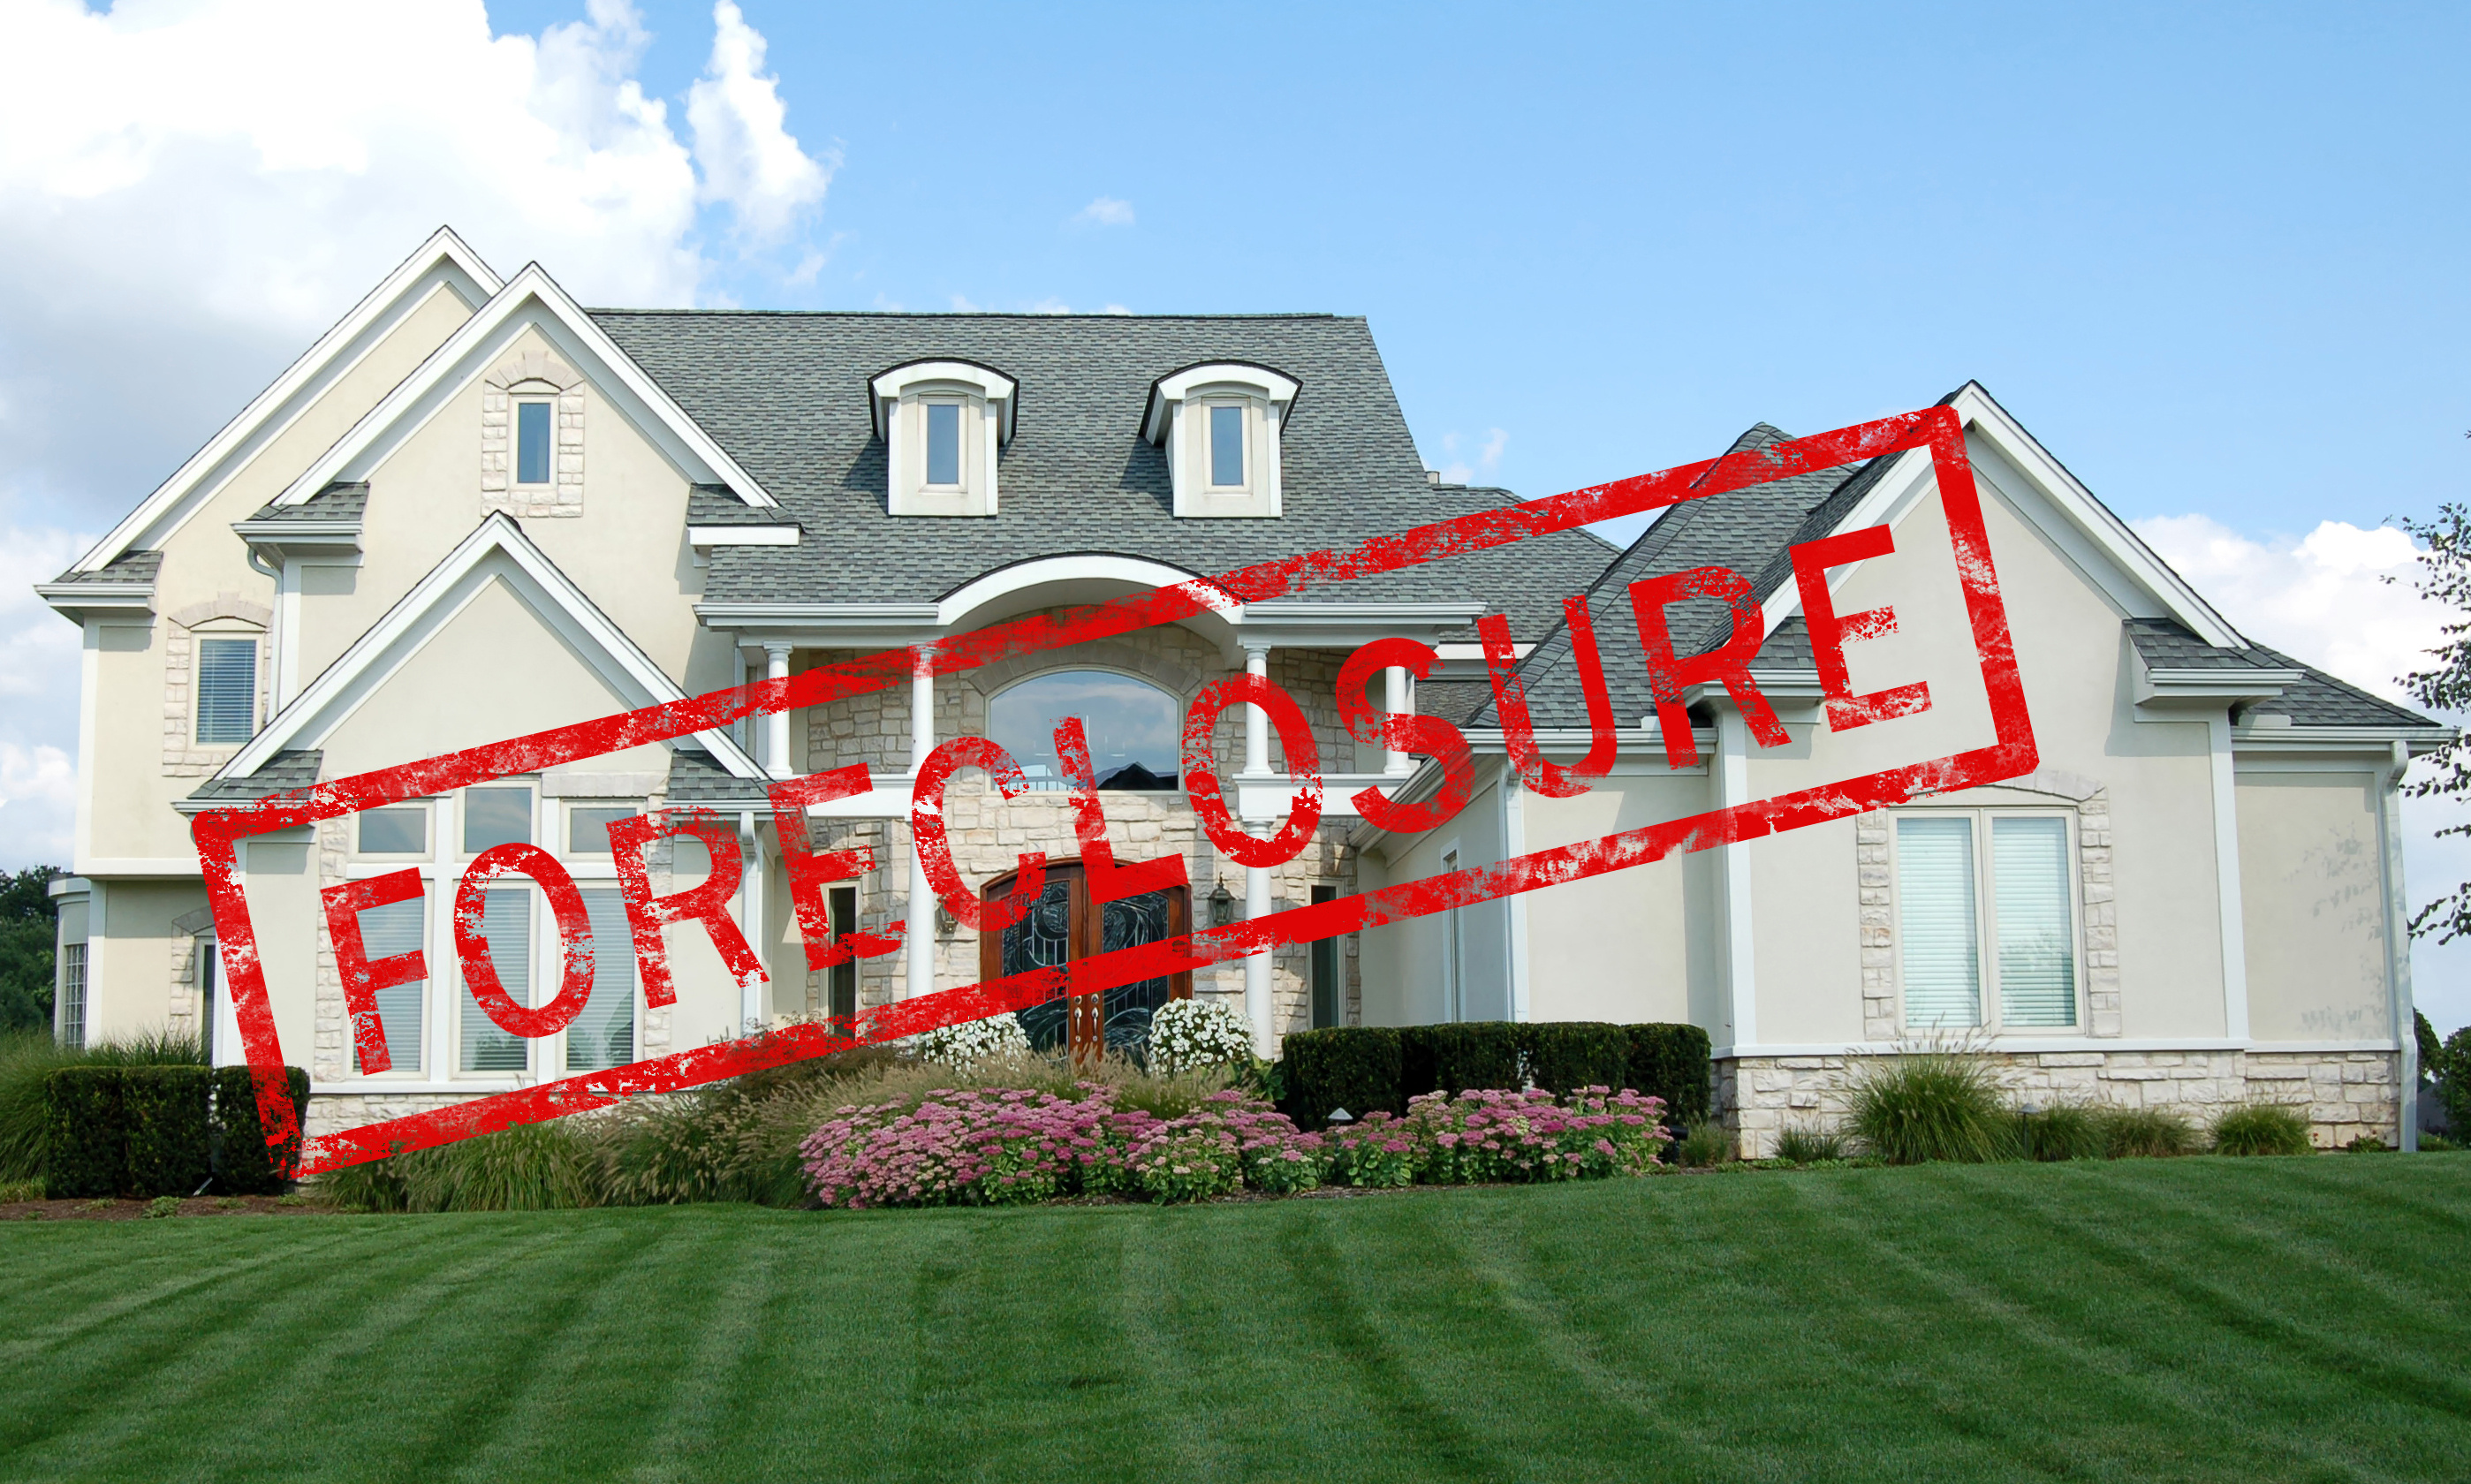 Call Dependable Real Estate Appraisers when you need appraisals for Hudson foreclosures